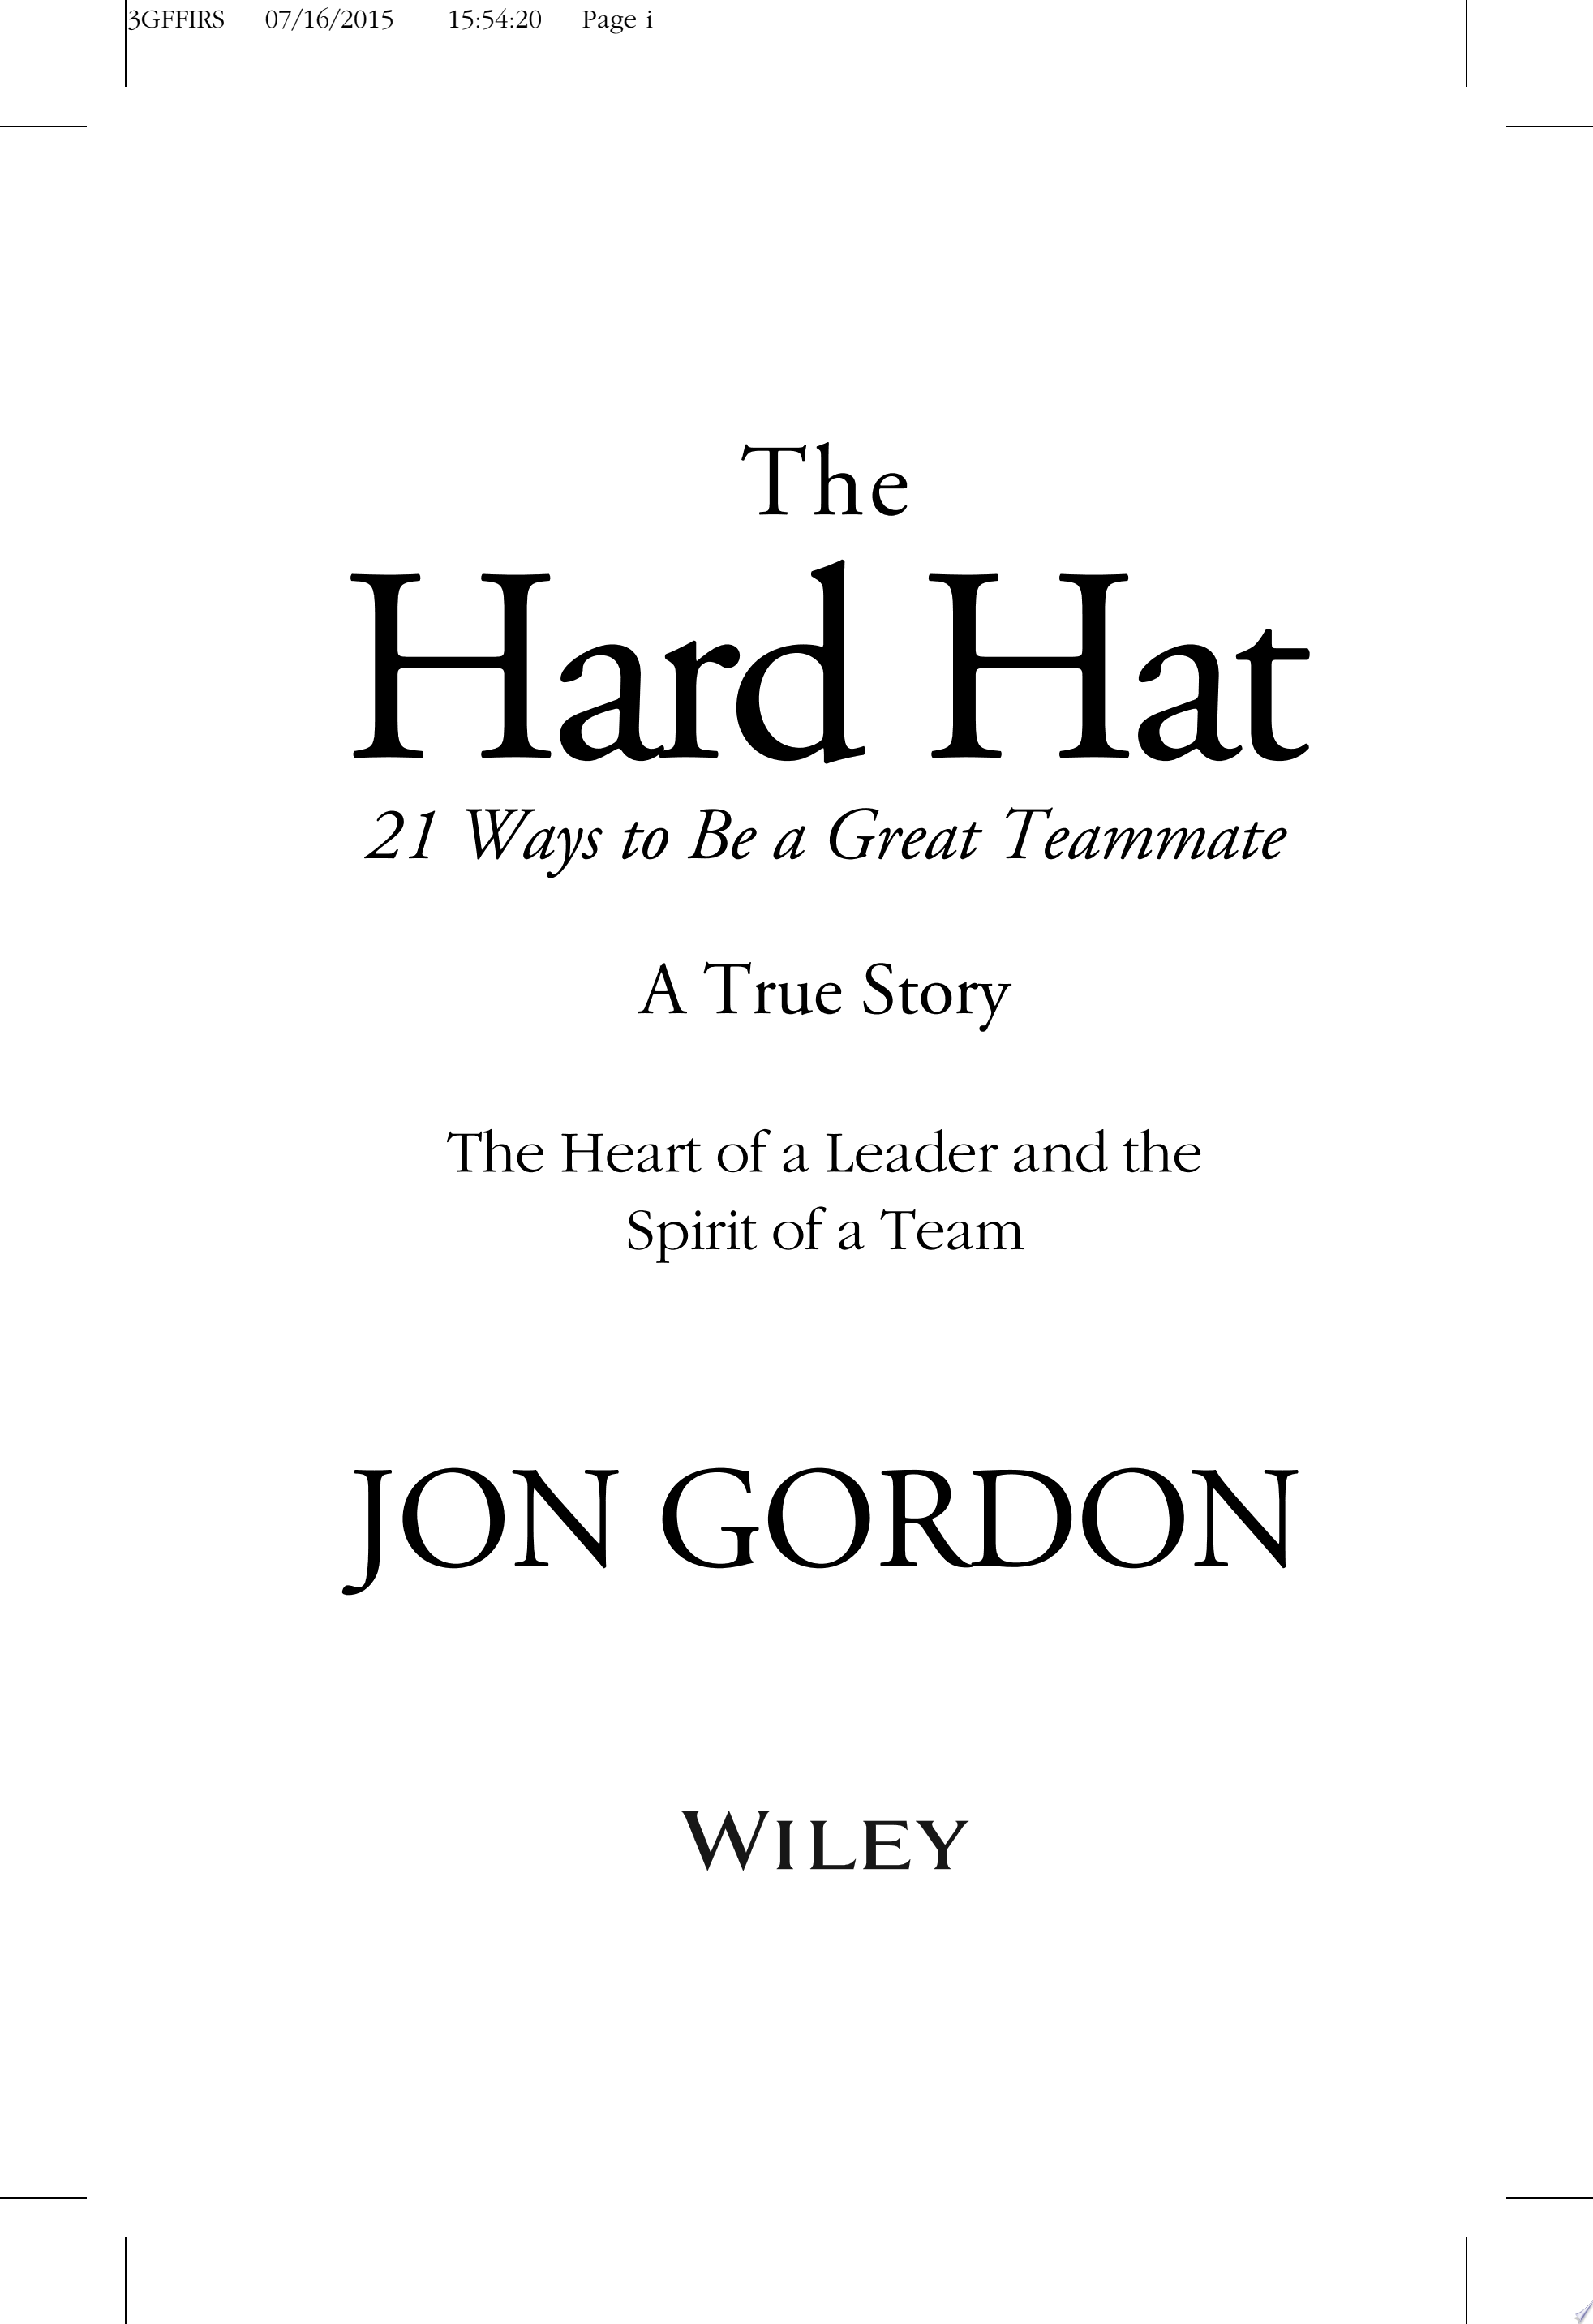 Image for "The Hard Hat"